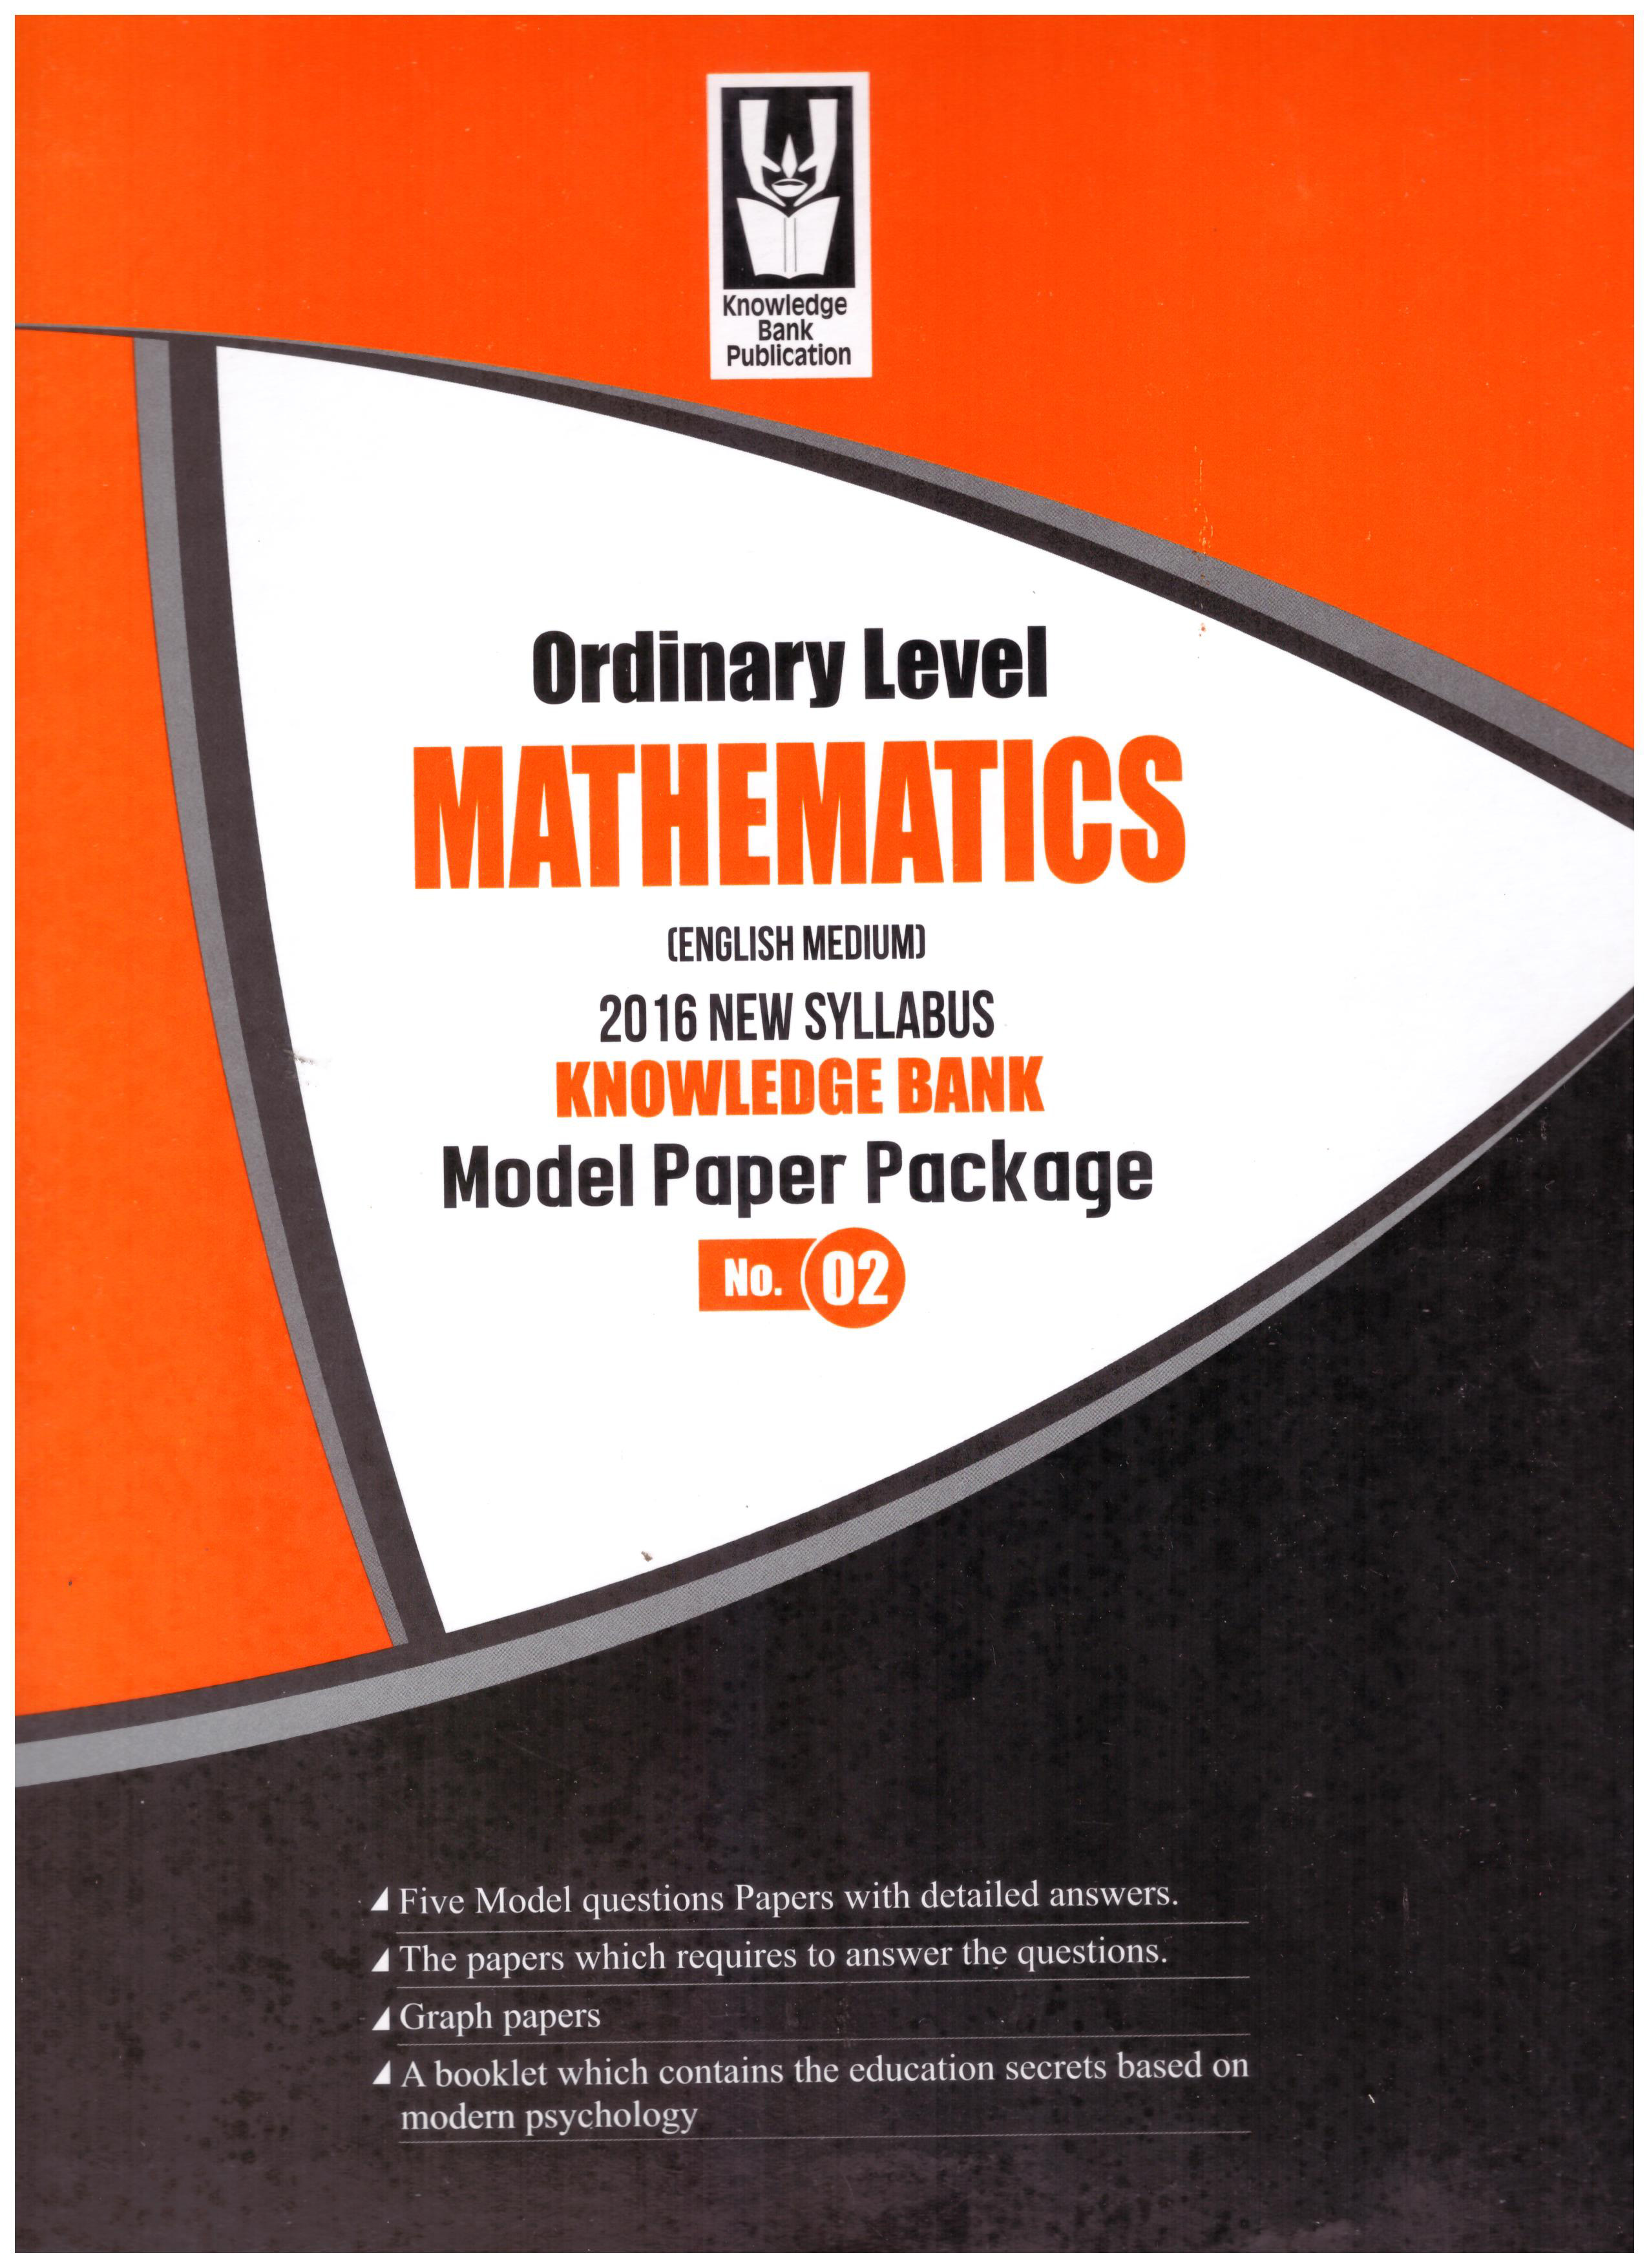 Knowledge Bank O/L Mathematics No 2 Model Paper Package